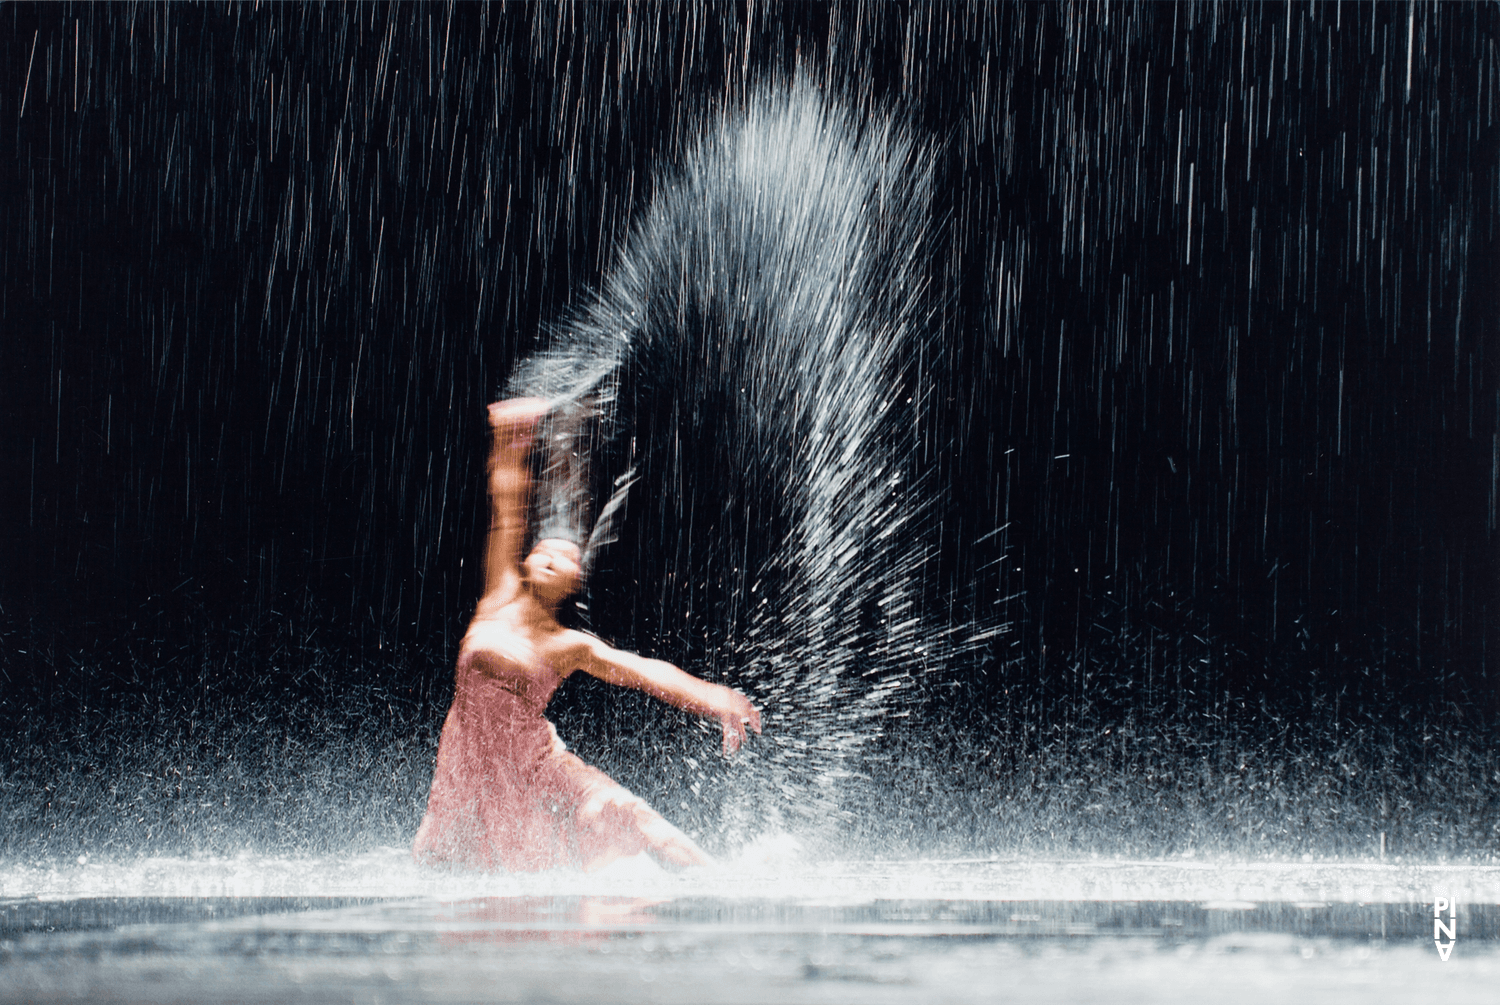 Silvia Farias Heredia in “Vollmond (Full Moon)” by Pina Bausch, Sept. 27, 2007